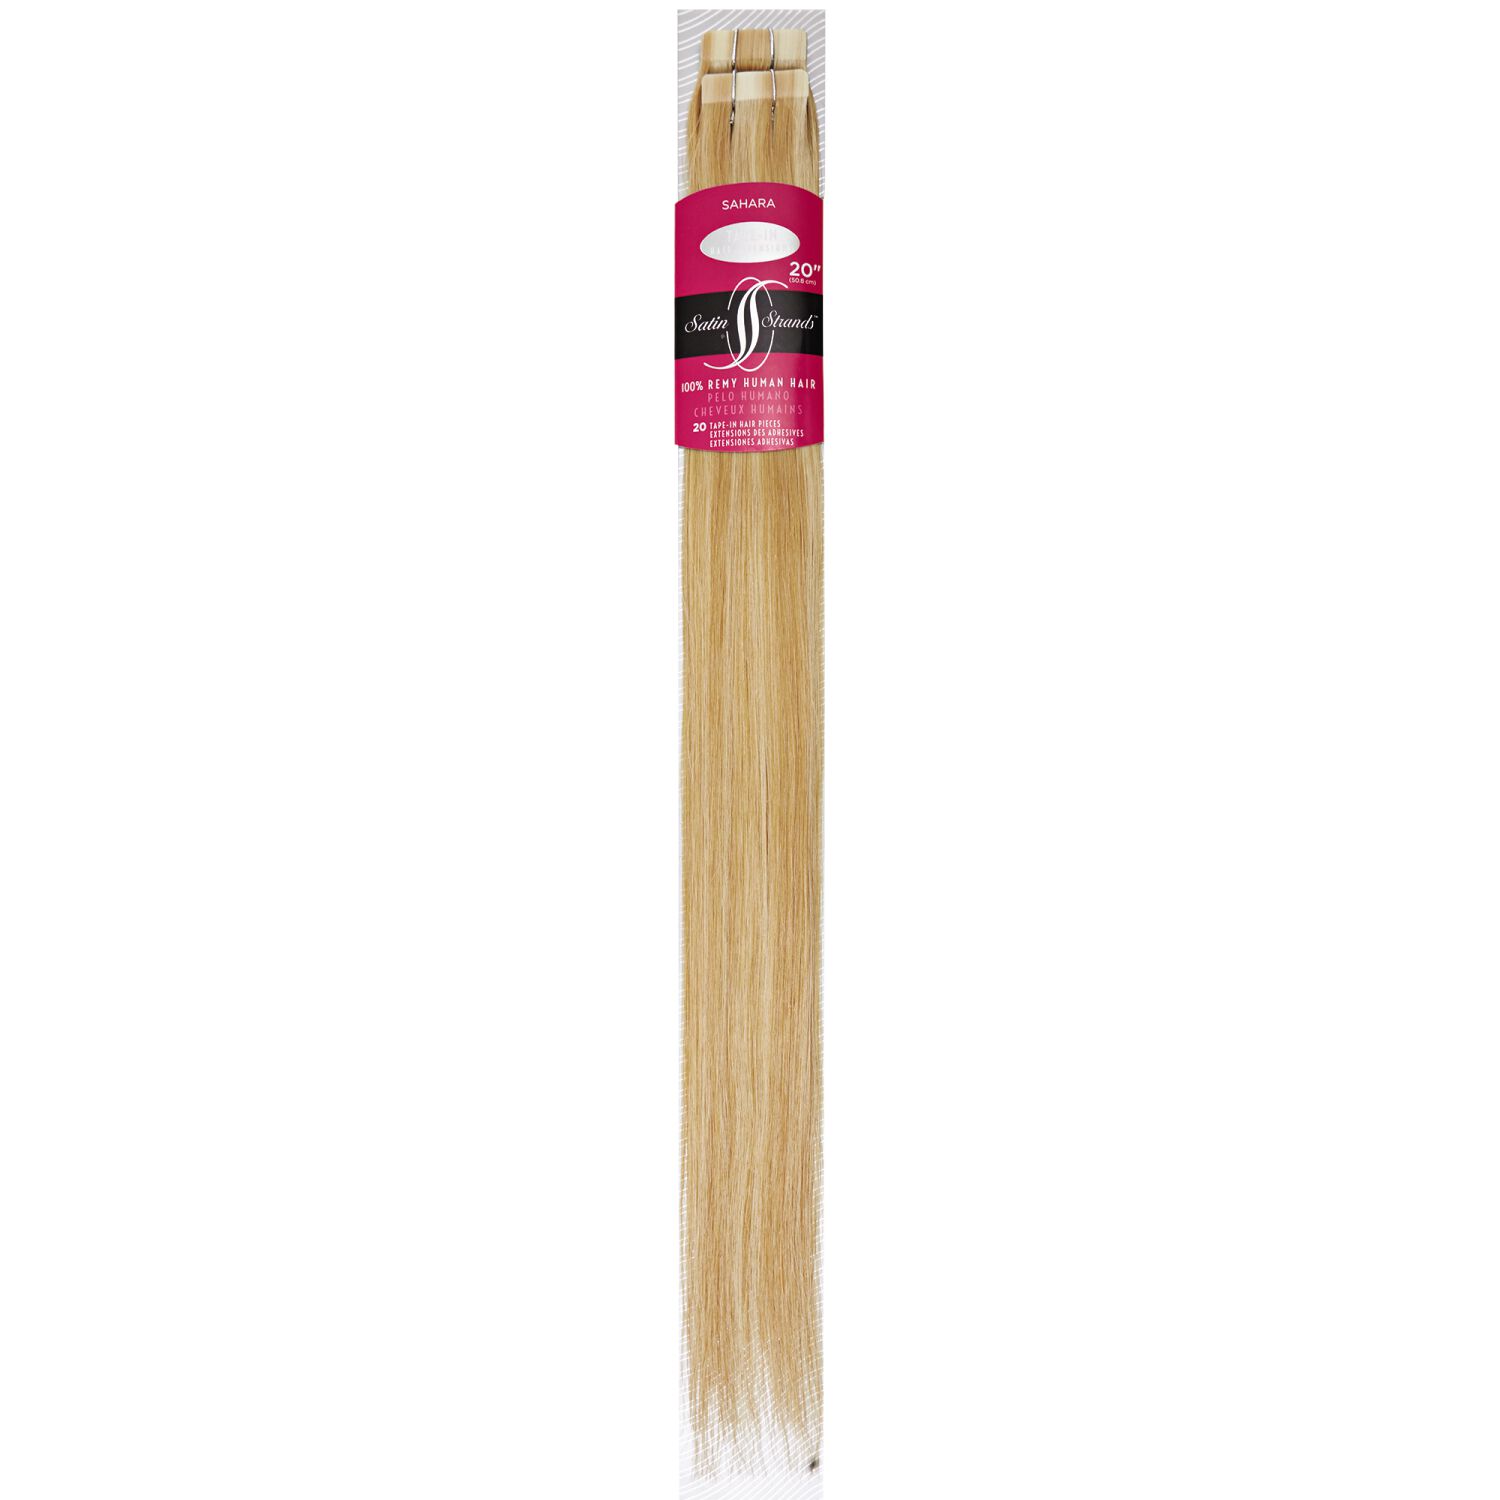 Satin Strands Tape In 20 Inch Human Hair Extensions | Weft Hair ...